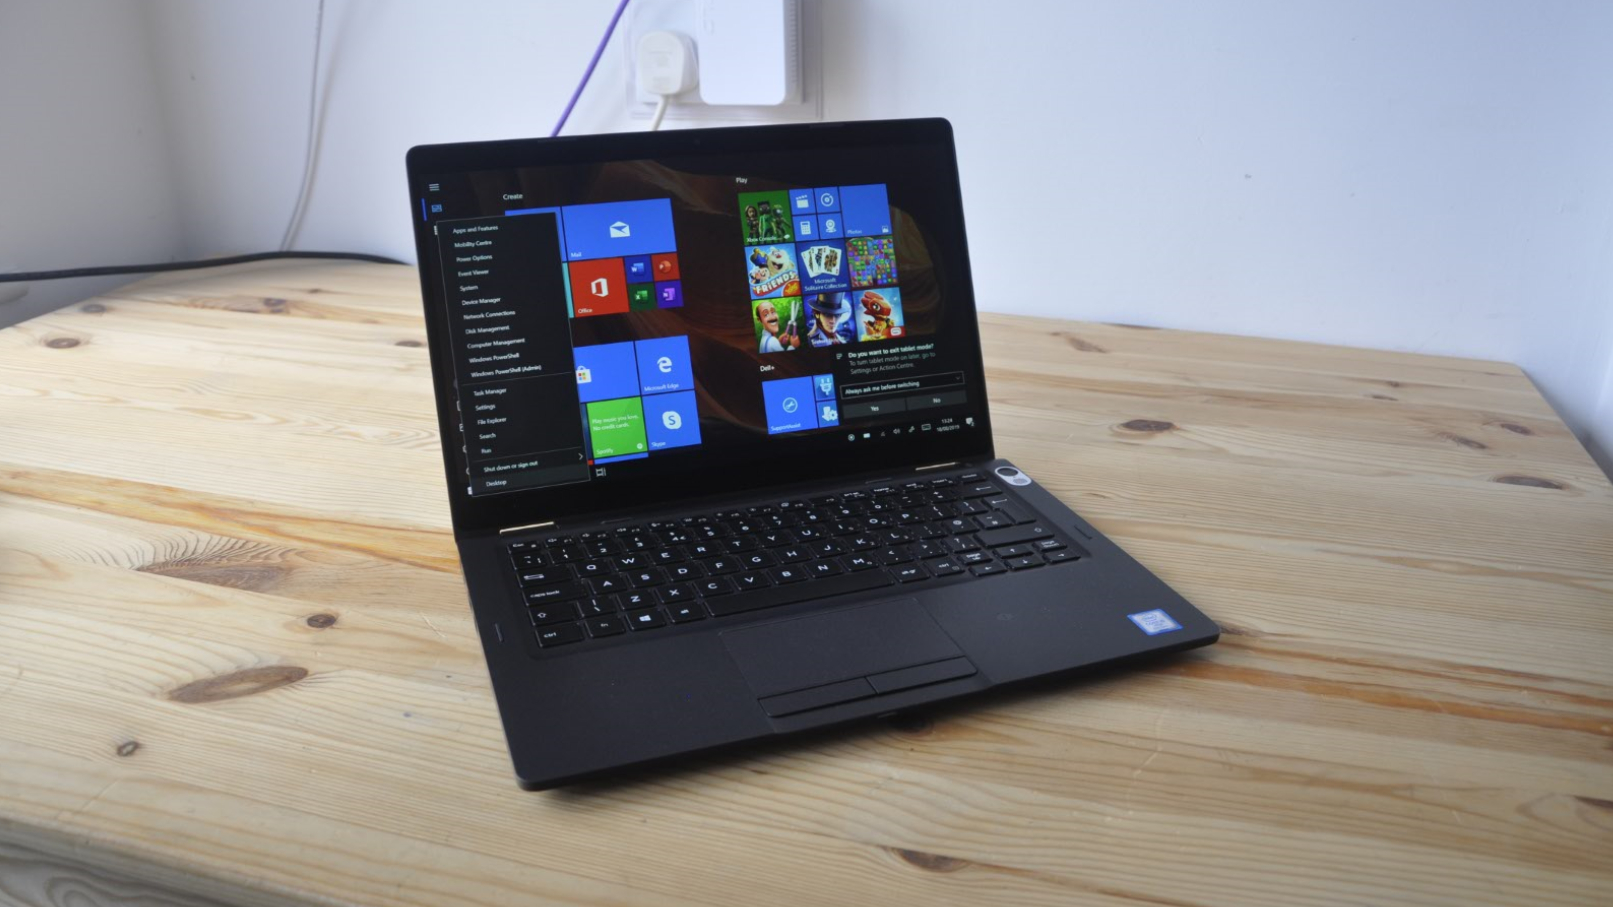 Dell Latitude 5300 2-in-1 laptop review